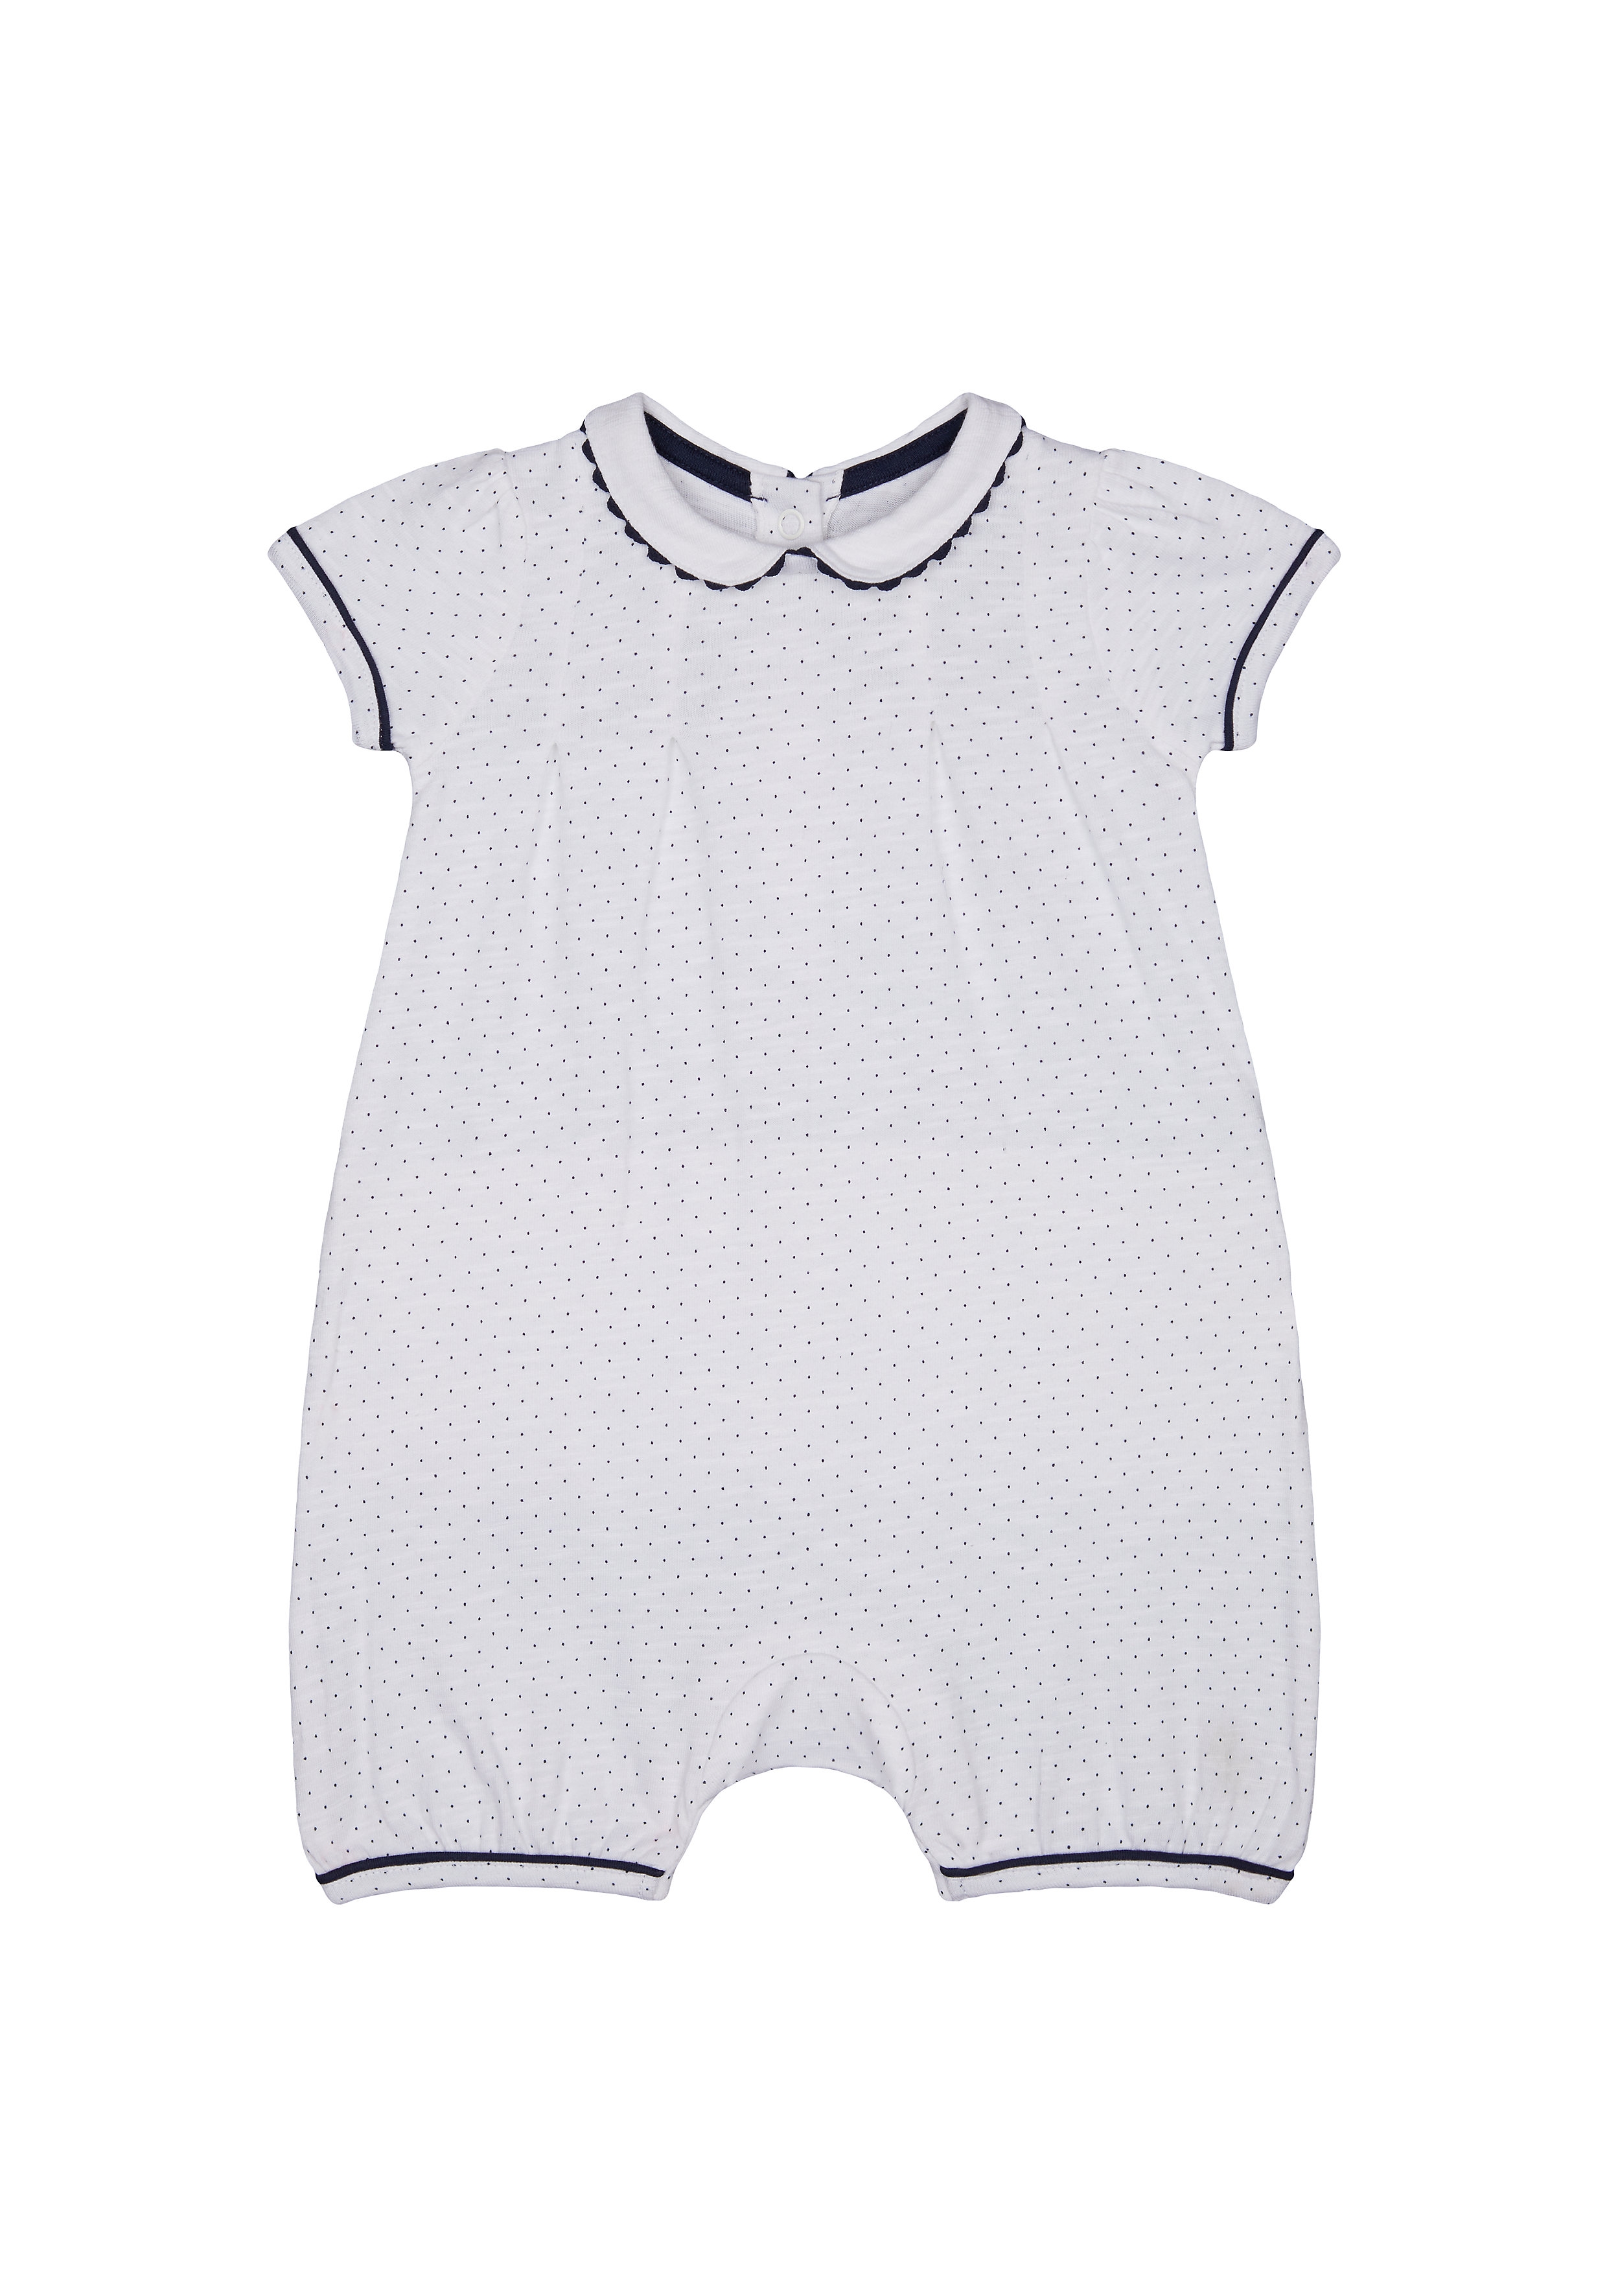 Mothercare | Girls Half Sleeves Romper Polka Dot Print With Lace Details - White